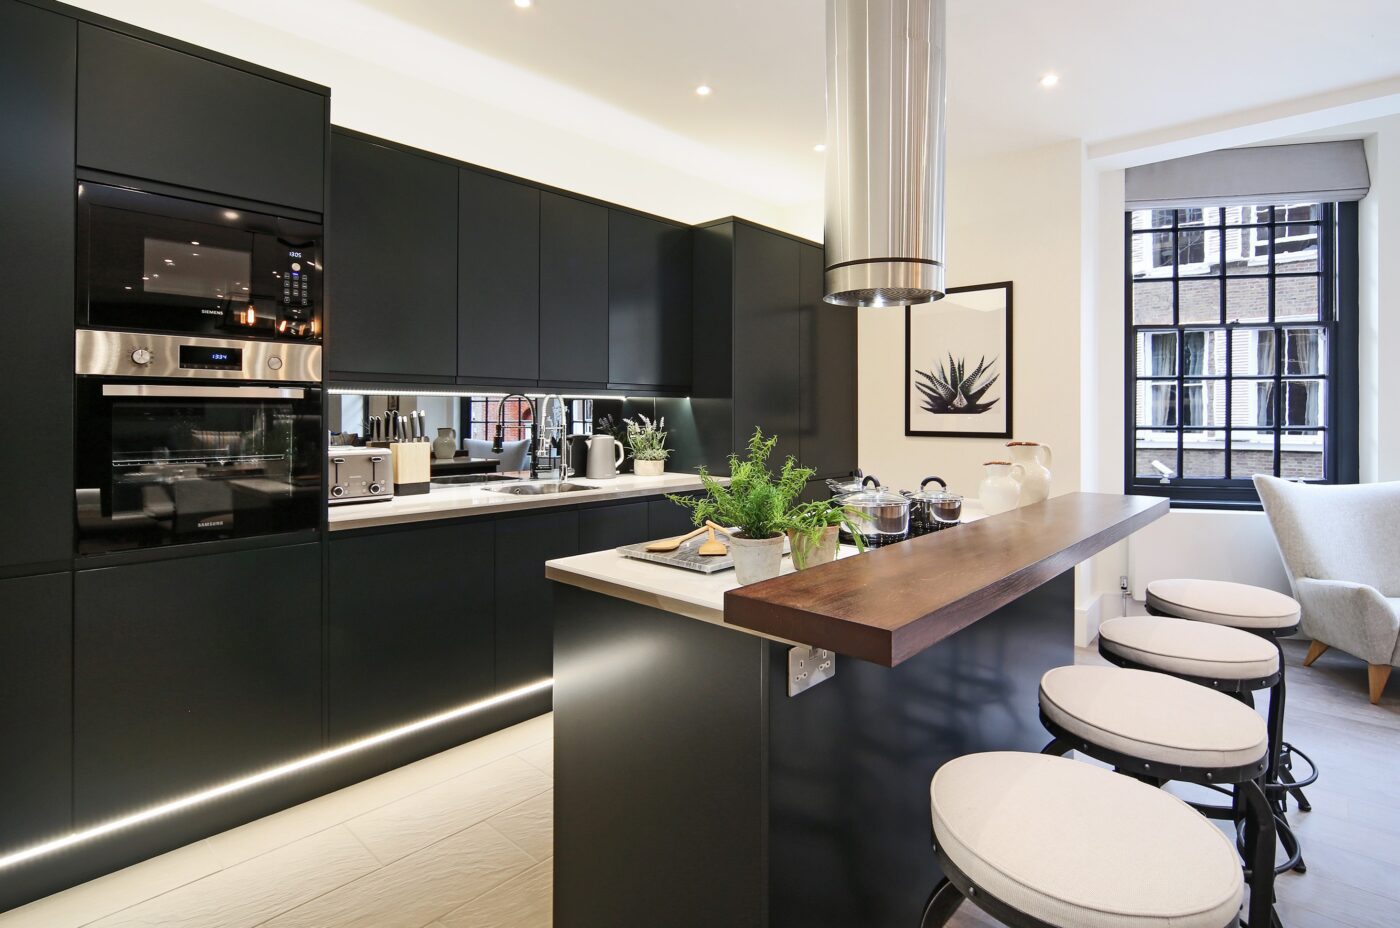 The bespoke kitchen of a luxury house in Central London which was refurbished by a bespoke interior designer